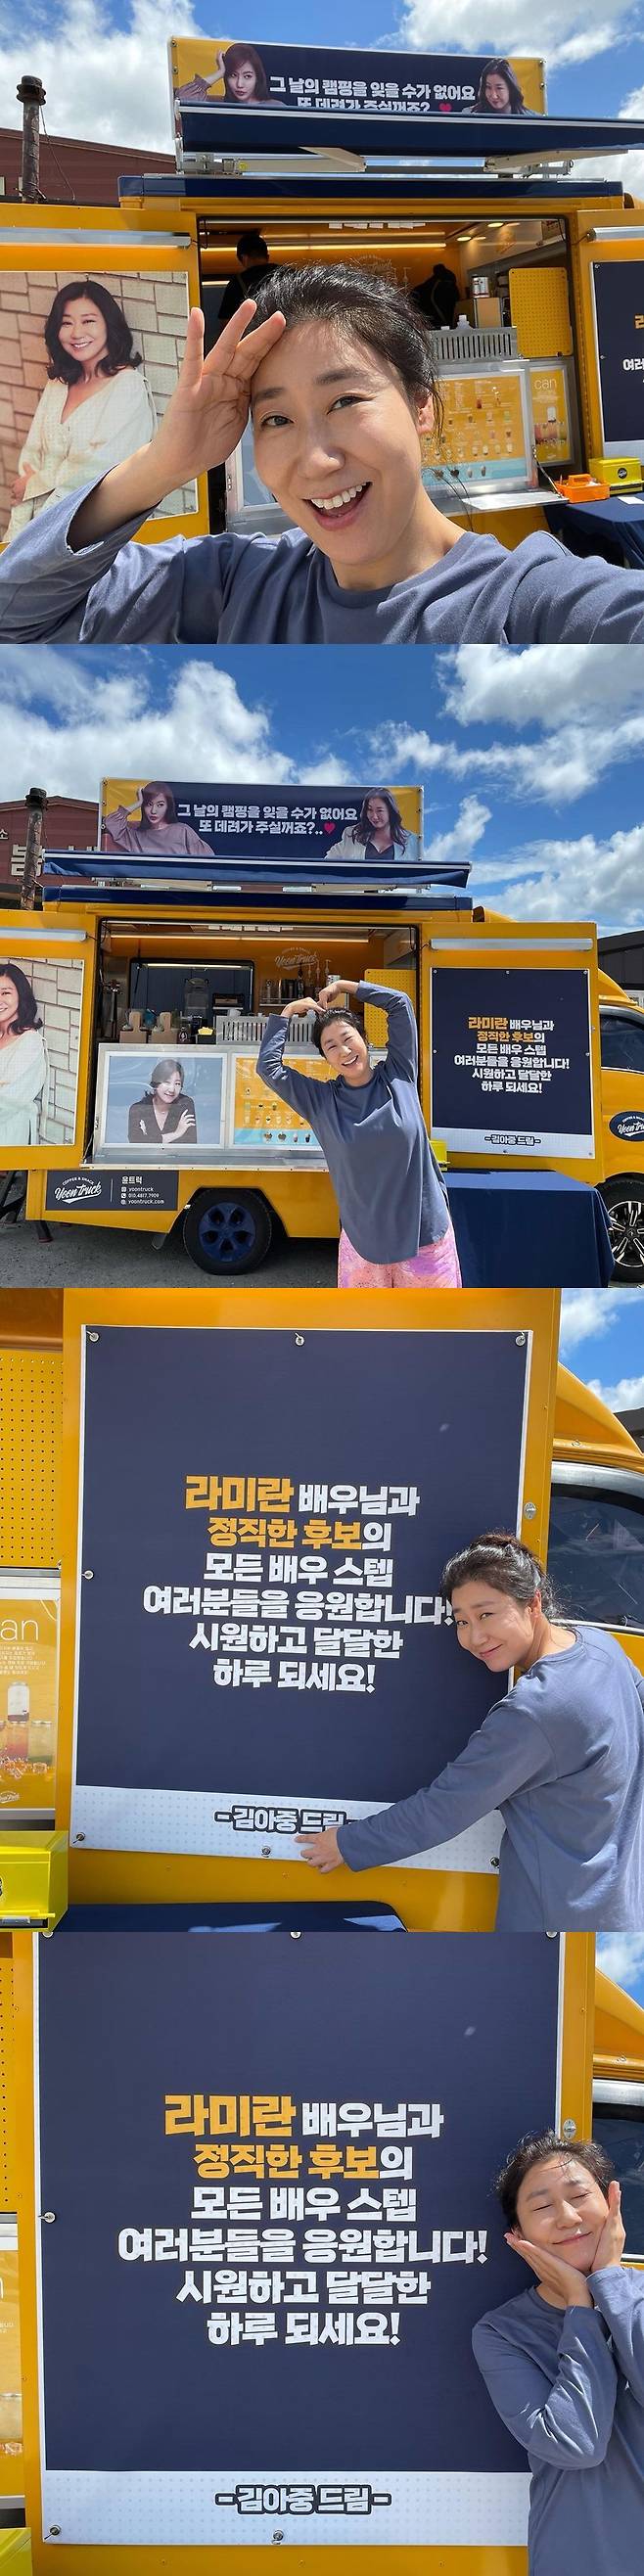 Actor Ra Mi-ran has revealed she is being hot Cheering by her colleagues.Ra Mi-ran wrote on his Instagram account on Wednesday: A cool coffee or Tea sent by Kim Ah-joong Actor.I will eat well, and released several photos.The photo showed Ra Mi-ran smiling with a cheerful smile set in Coffee or Tea sent by Kim Ah-joong.Kim Ah-joong, via Coffee or Tea, Cheering Ra Mi-ran Actor and all the Actor, staff of honest candidate:Have a cool and sweet day, Cheering said.Ra Mi-ran is currently in the midst of filming the movie Honest Candidate 2.Coffee or Tea Cheering by fellow entertainers is pouring in for Ra Mi-ran, who is filming a new movie in a difficult time with Corona, adding to the hunting.